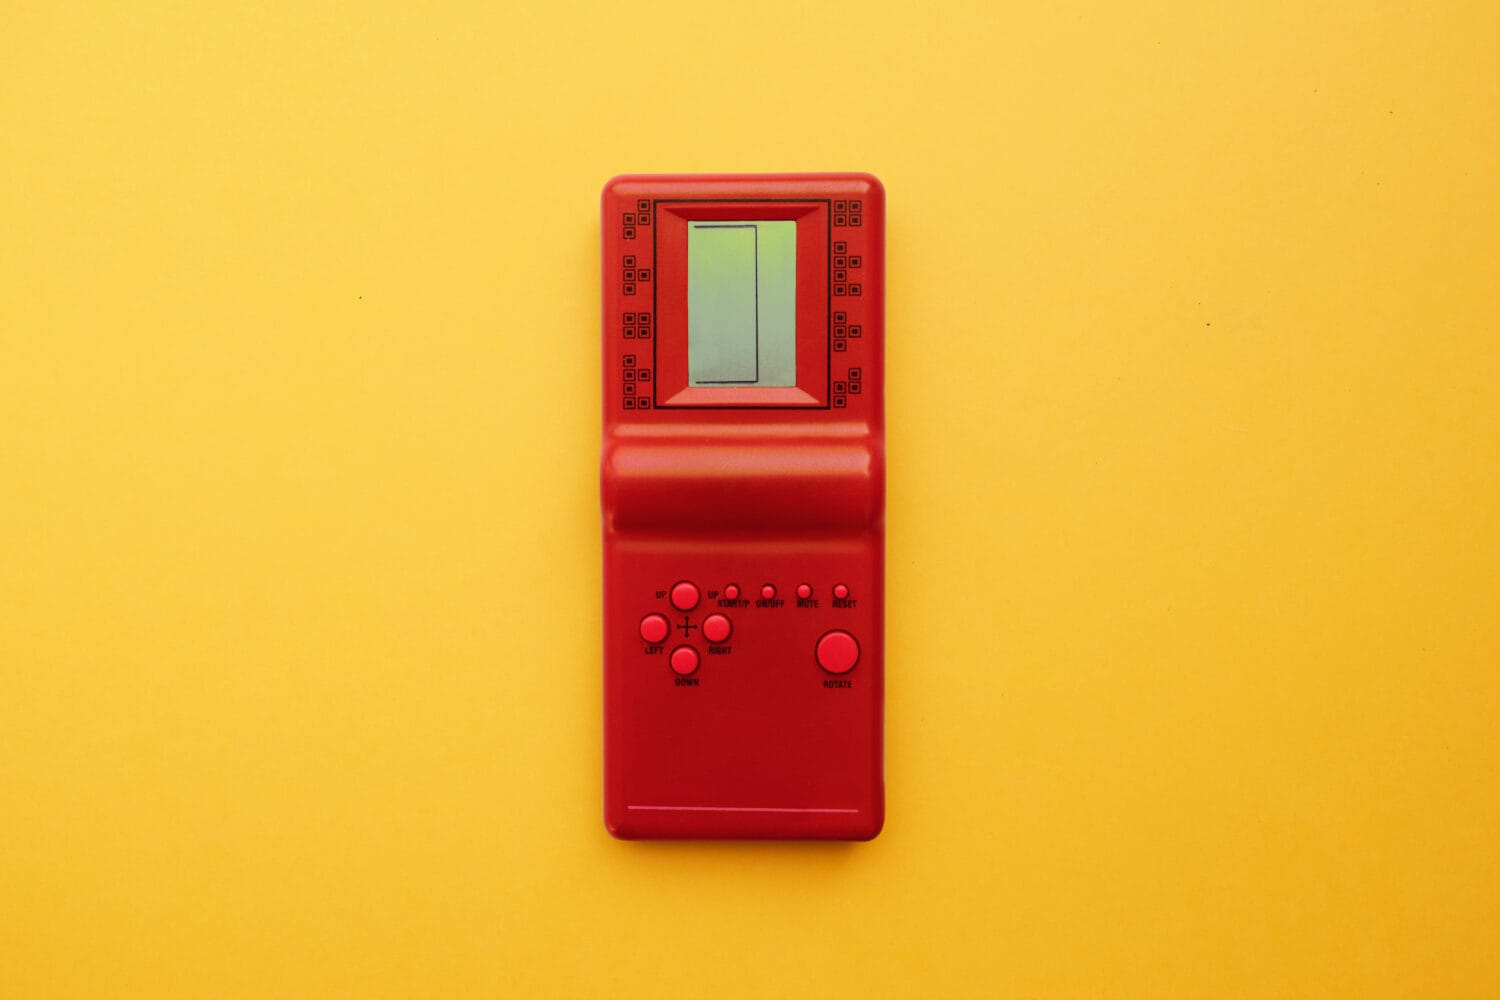 What we bought: The Retroid Pocket 3 is my own personal retro-game